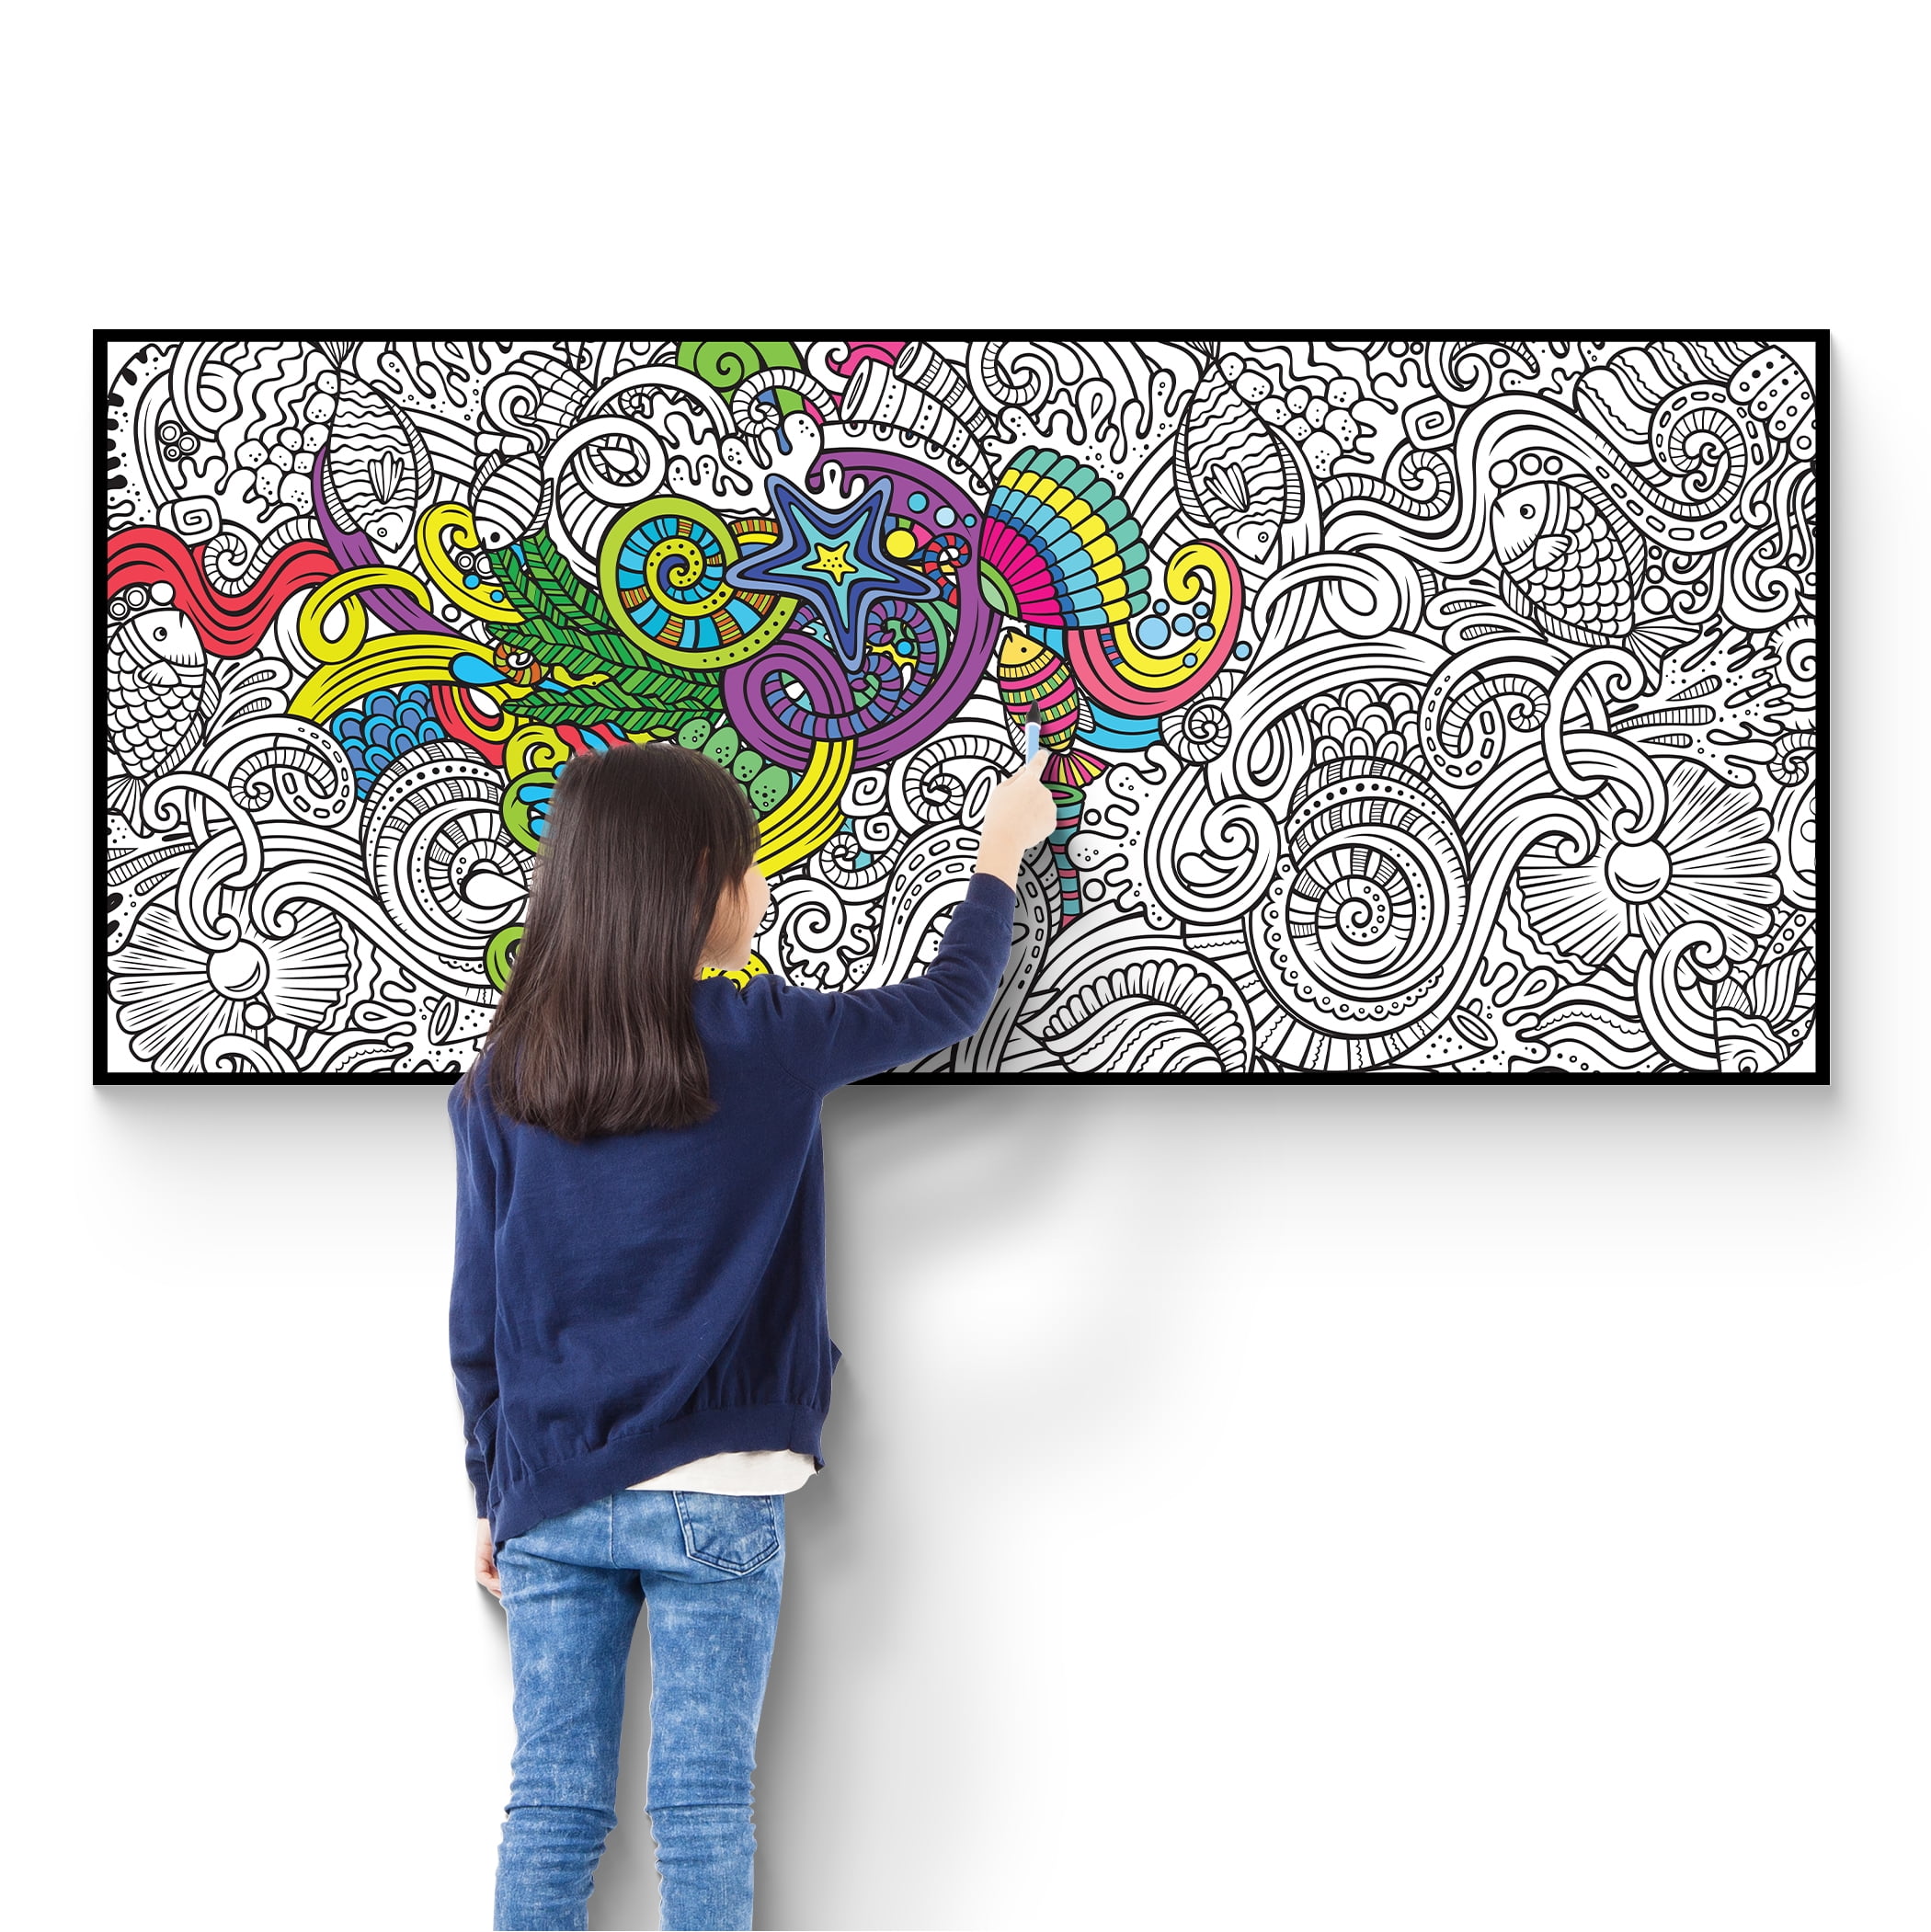 Huge Coloring Poster for Adults and Kids - Tree of Life Inspirational Large Wall Coloring Art - Giant Coloring Posters - Jumbo Coloring Pages - Big